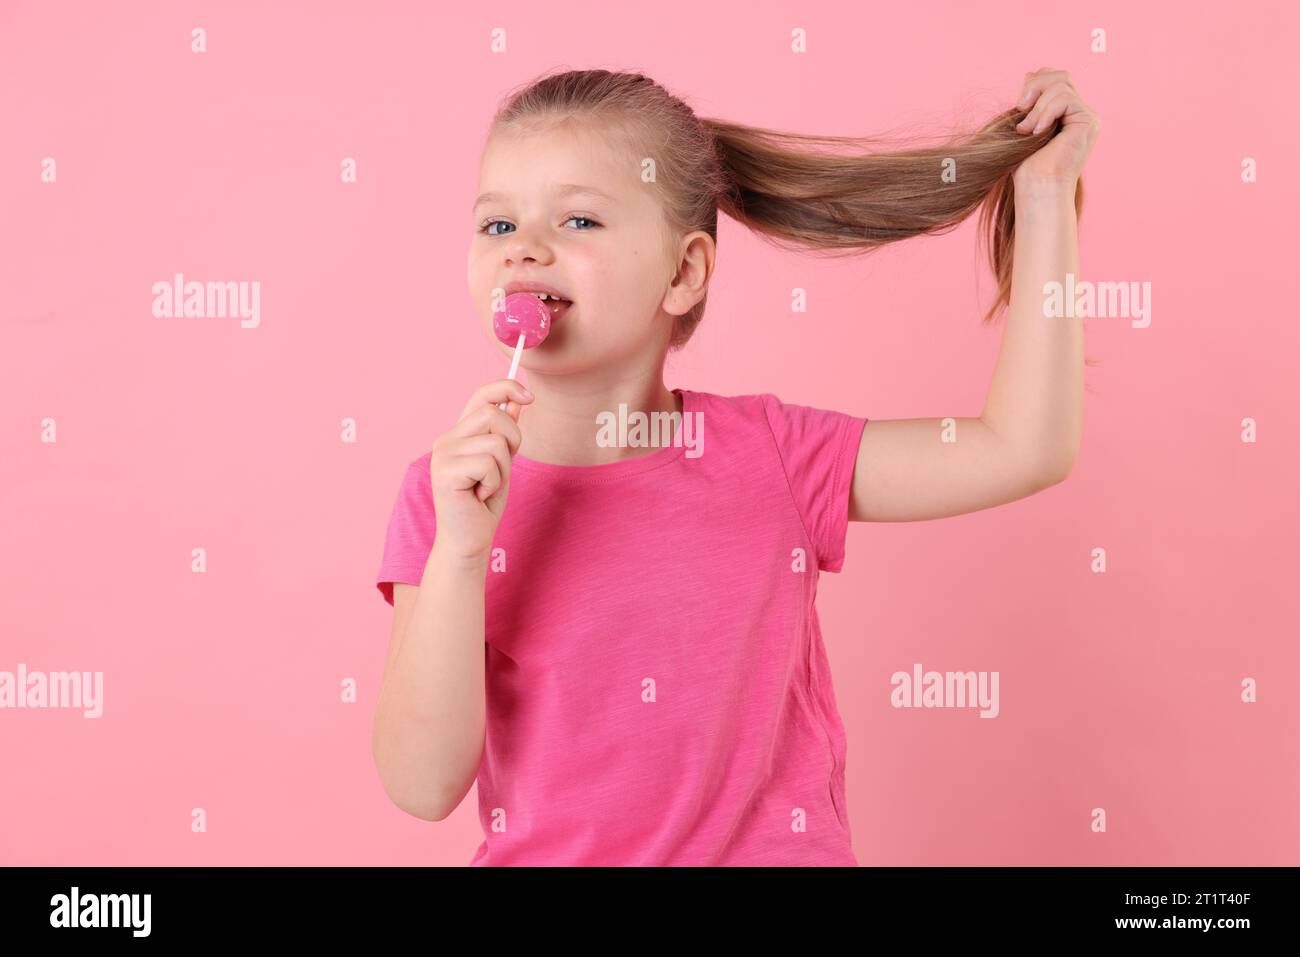 Cute little girl licking lollipop on pink background Stock Photo